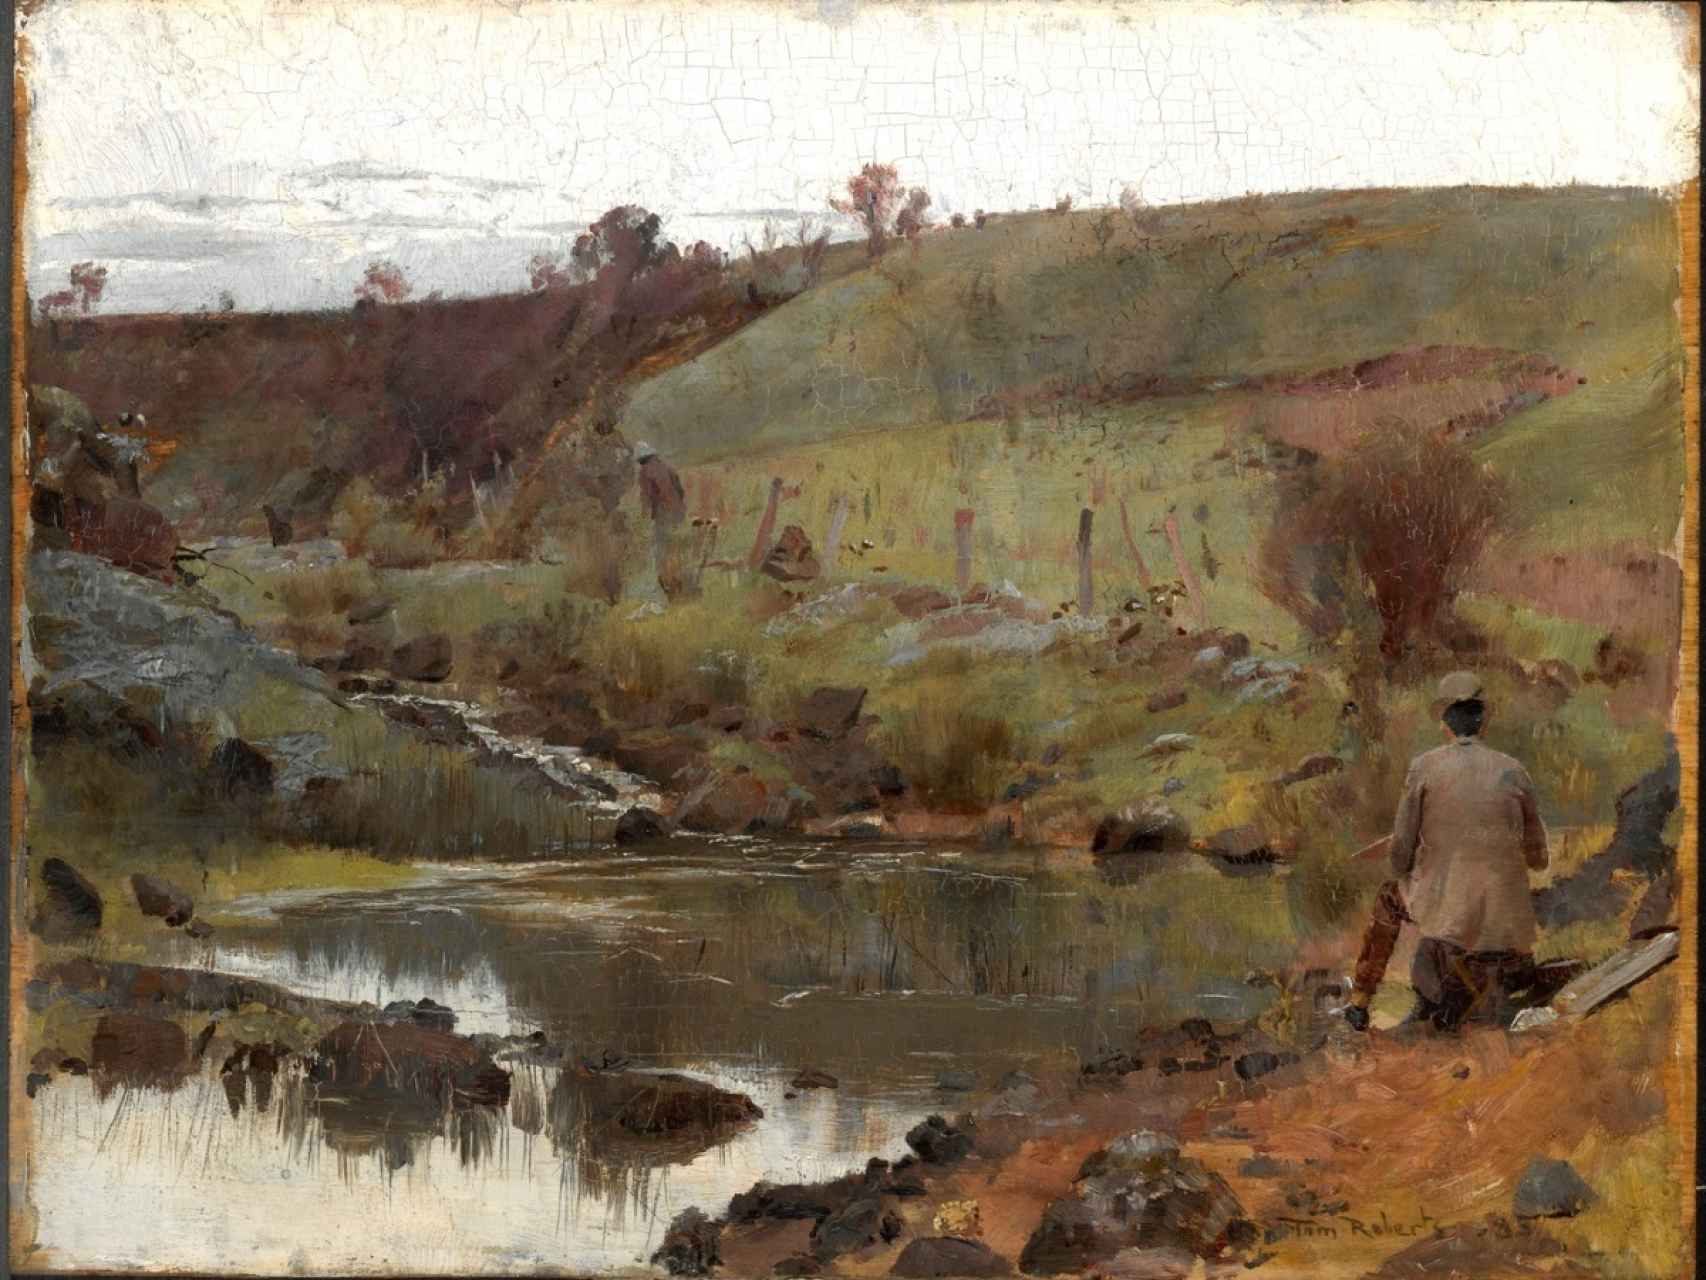 Tom Roberts. National Gallery of Australia, Canberra.